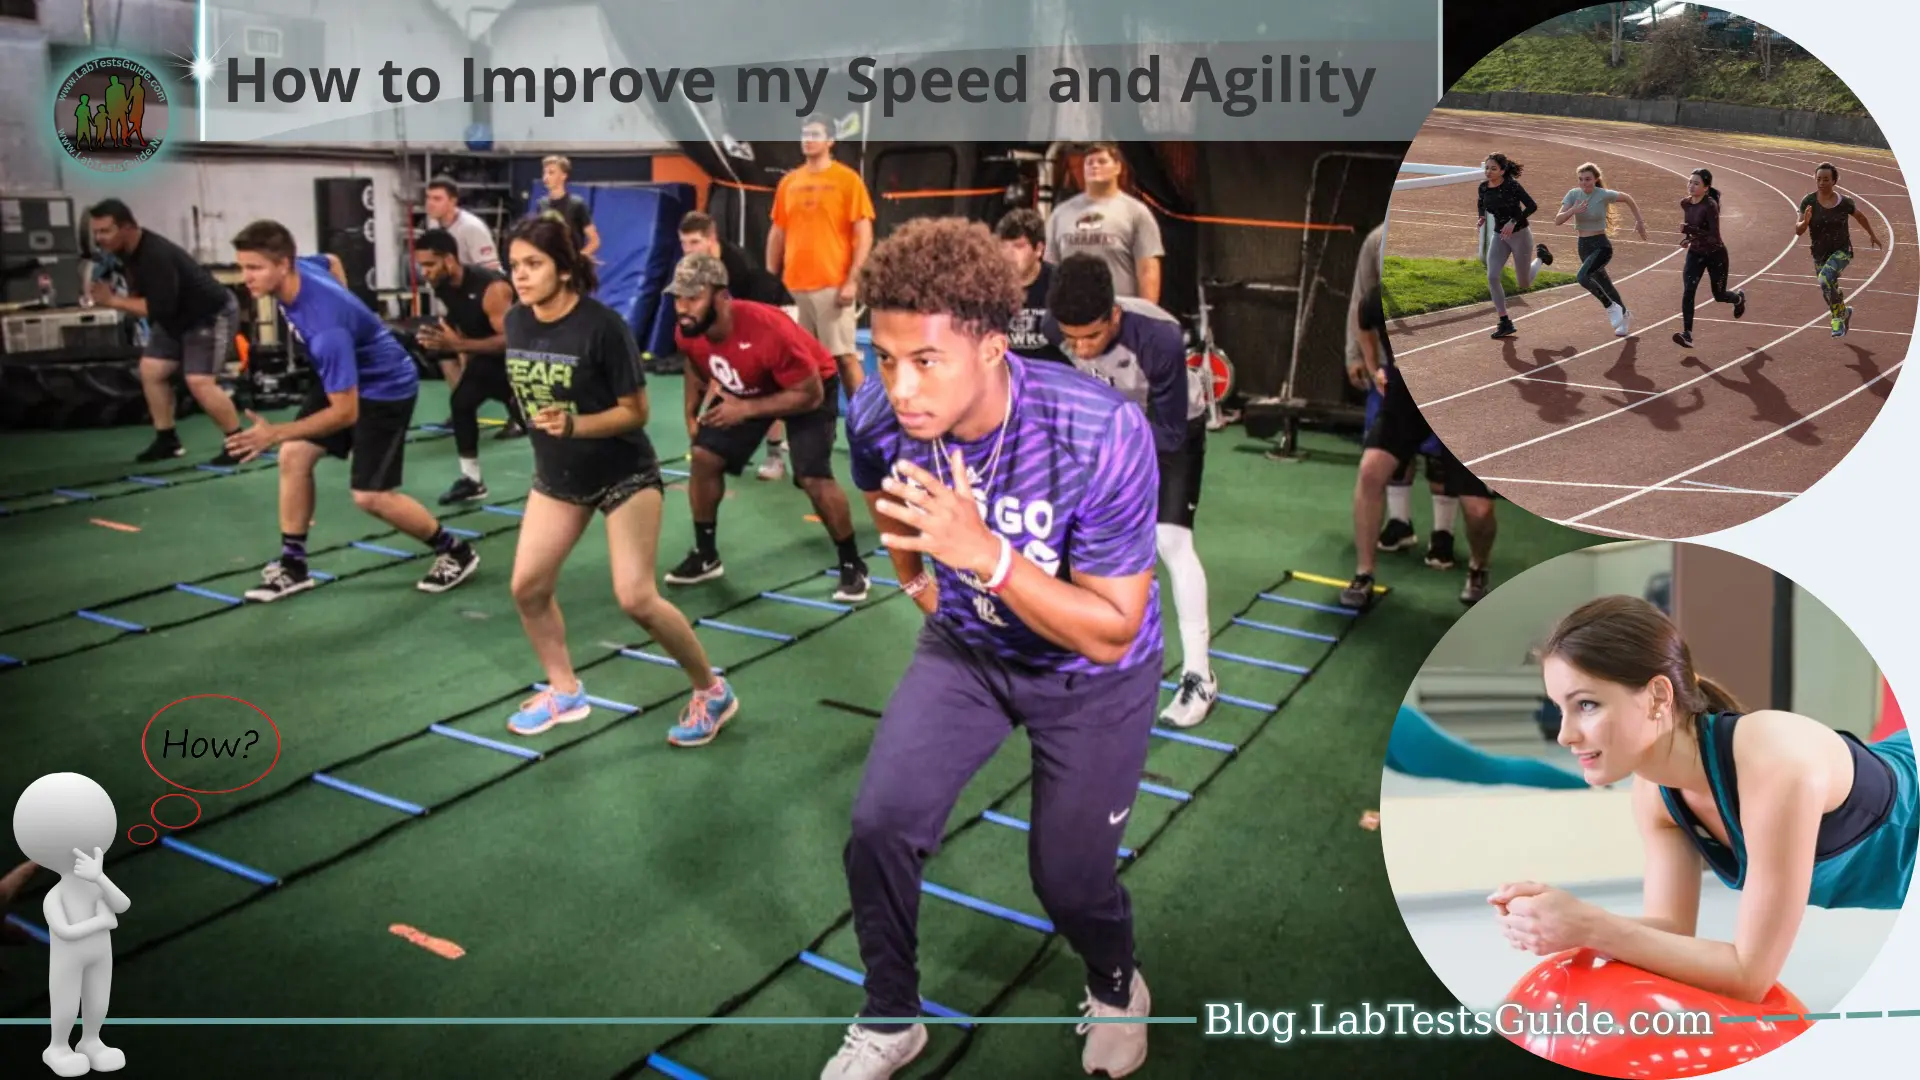 How to Improve my Speed and Agility - Lab Tests Guide Blog